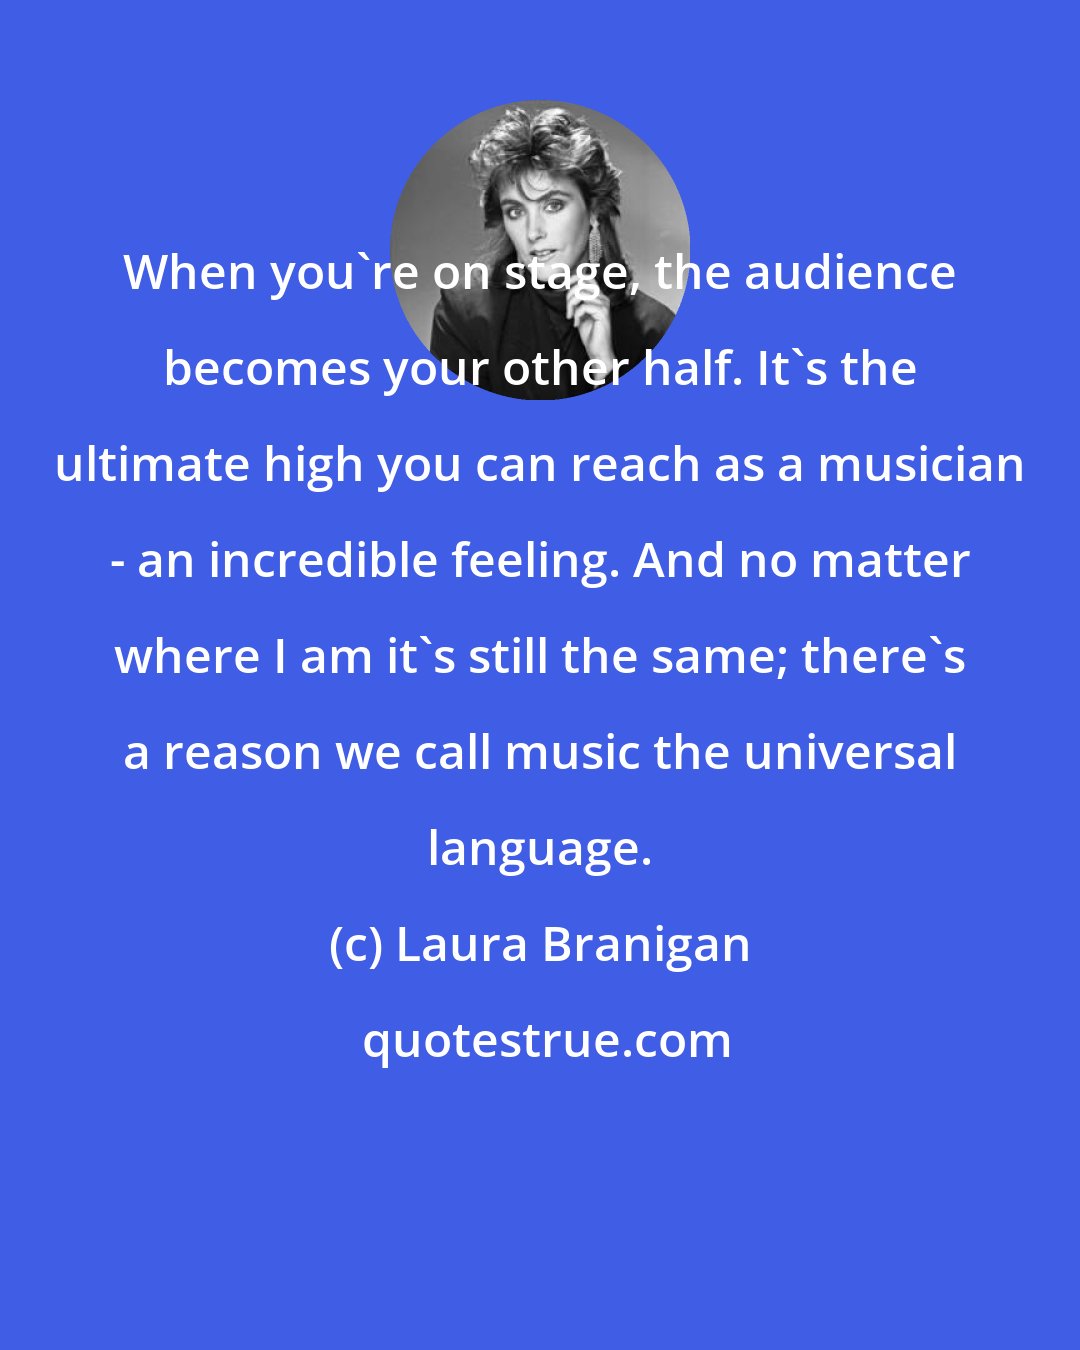 Laura Branigan: When you're on stage, the audience becomes your other half. It's the ultimate high you can reach as a musician - an incredible feeling. And no matter where I am it's still the same; there's a reason we call music the universal language.